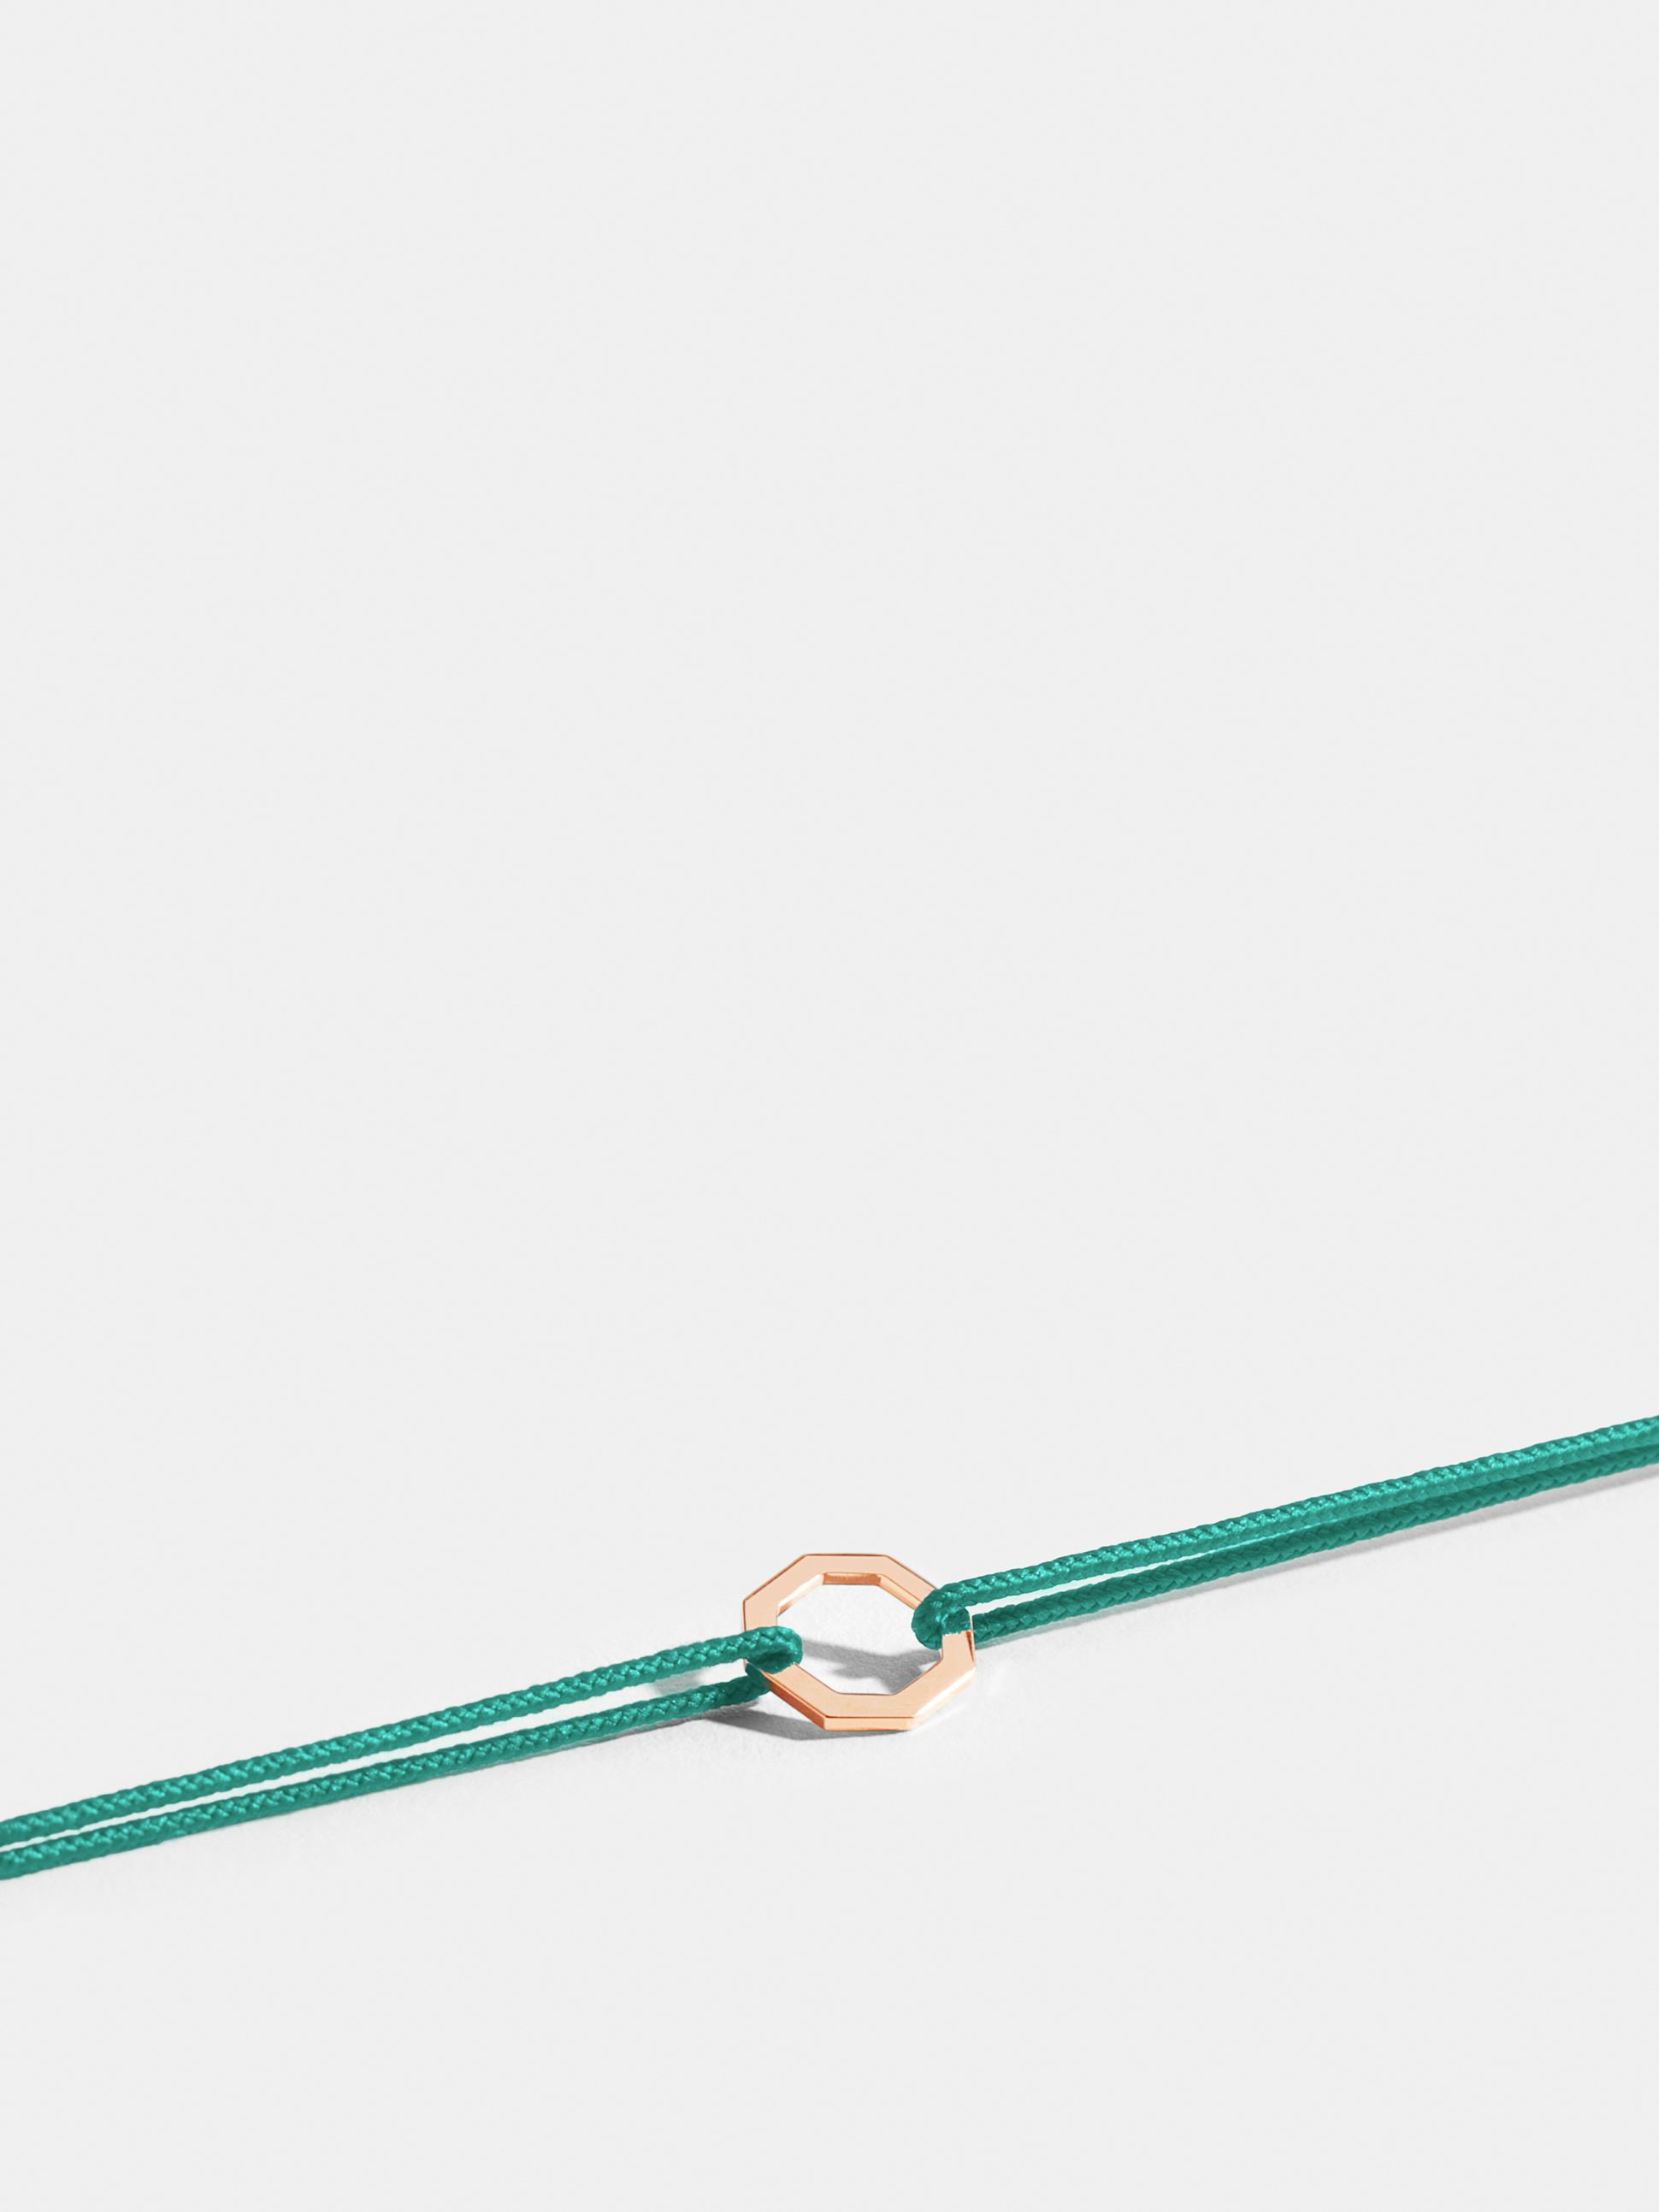 Octogone motif in 18k Fairmined ethical rose gold, on a turquoise blue cord. 